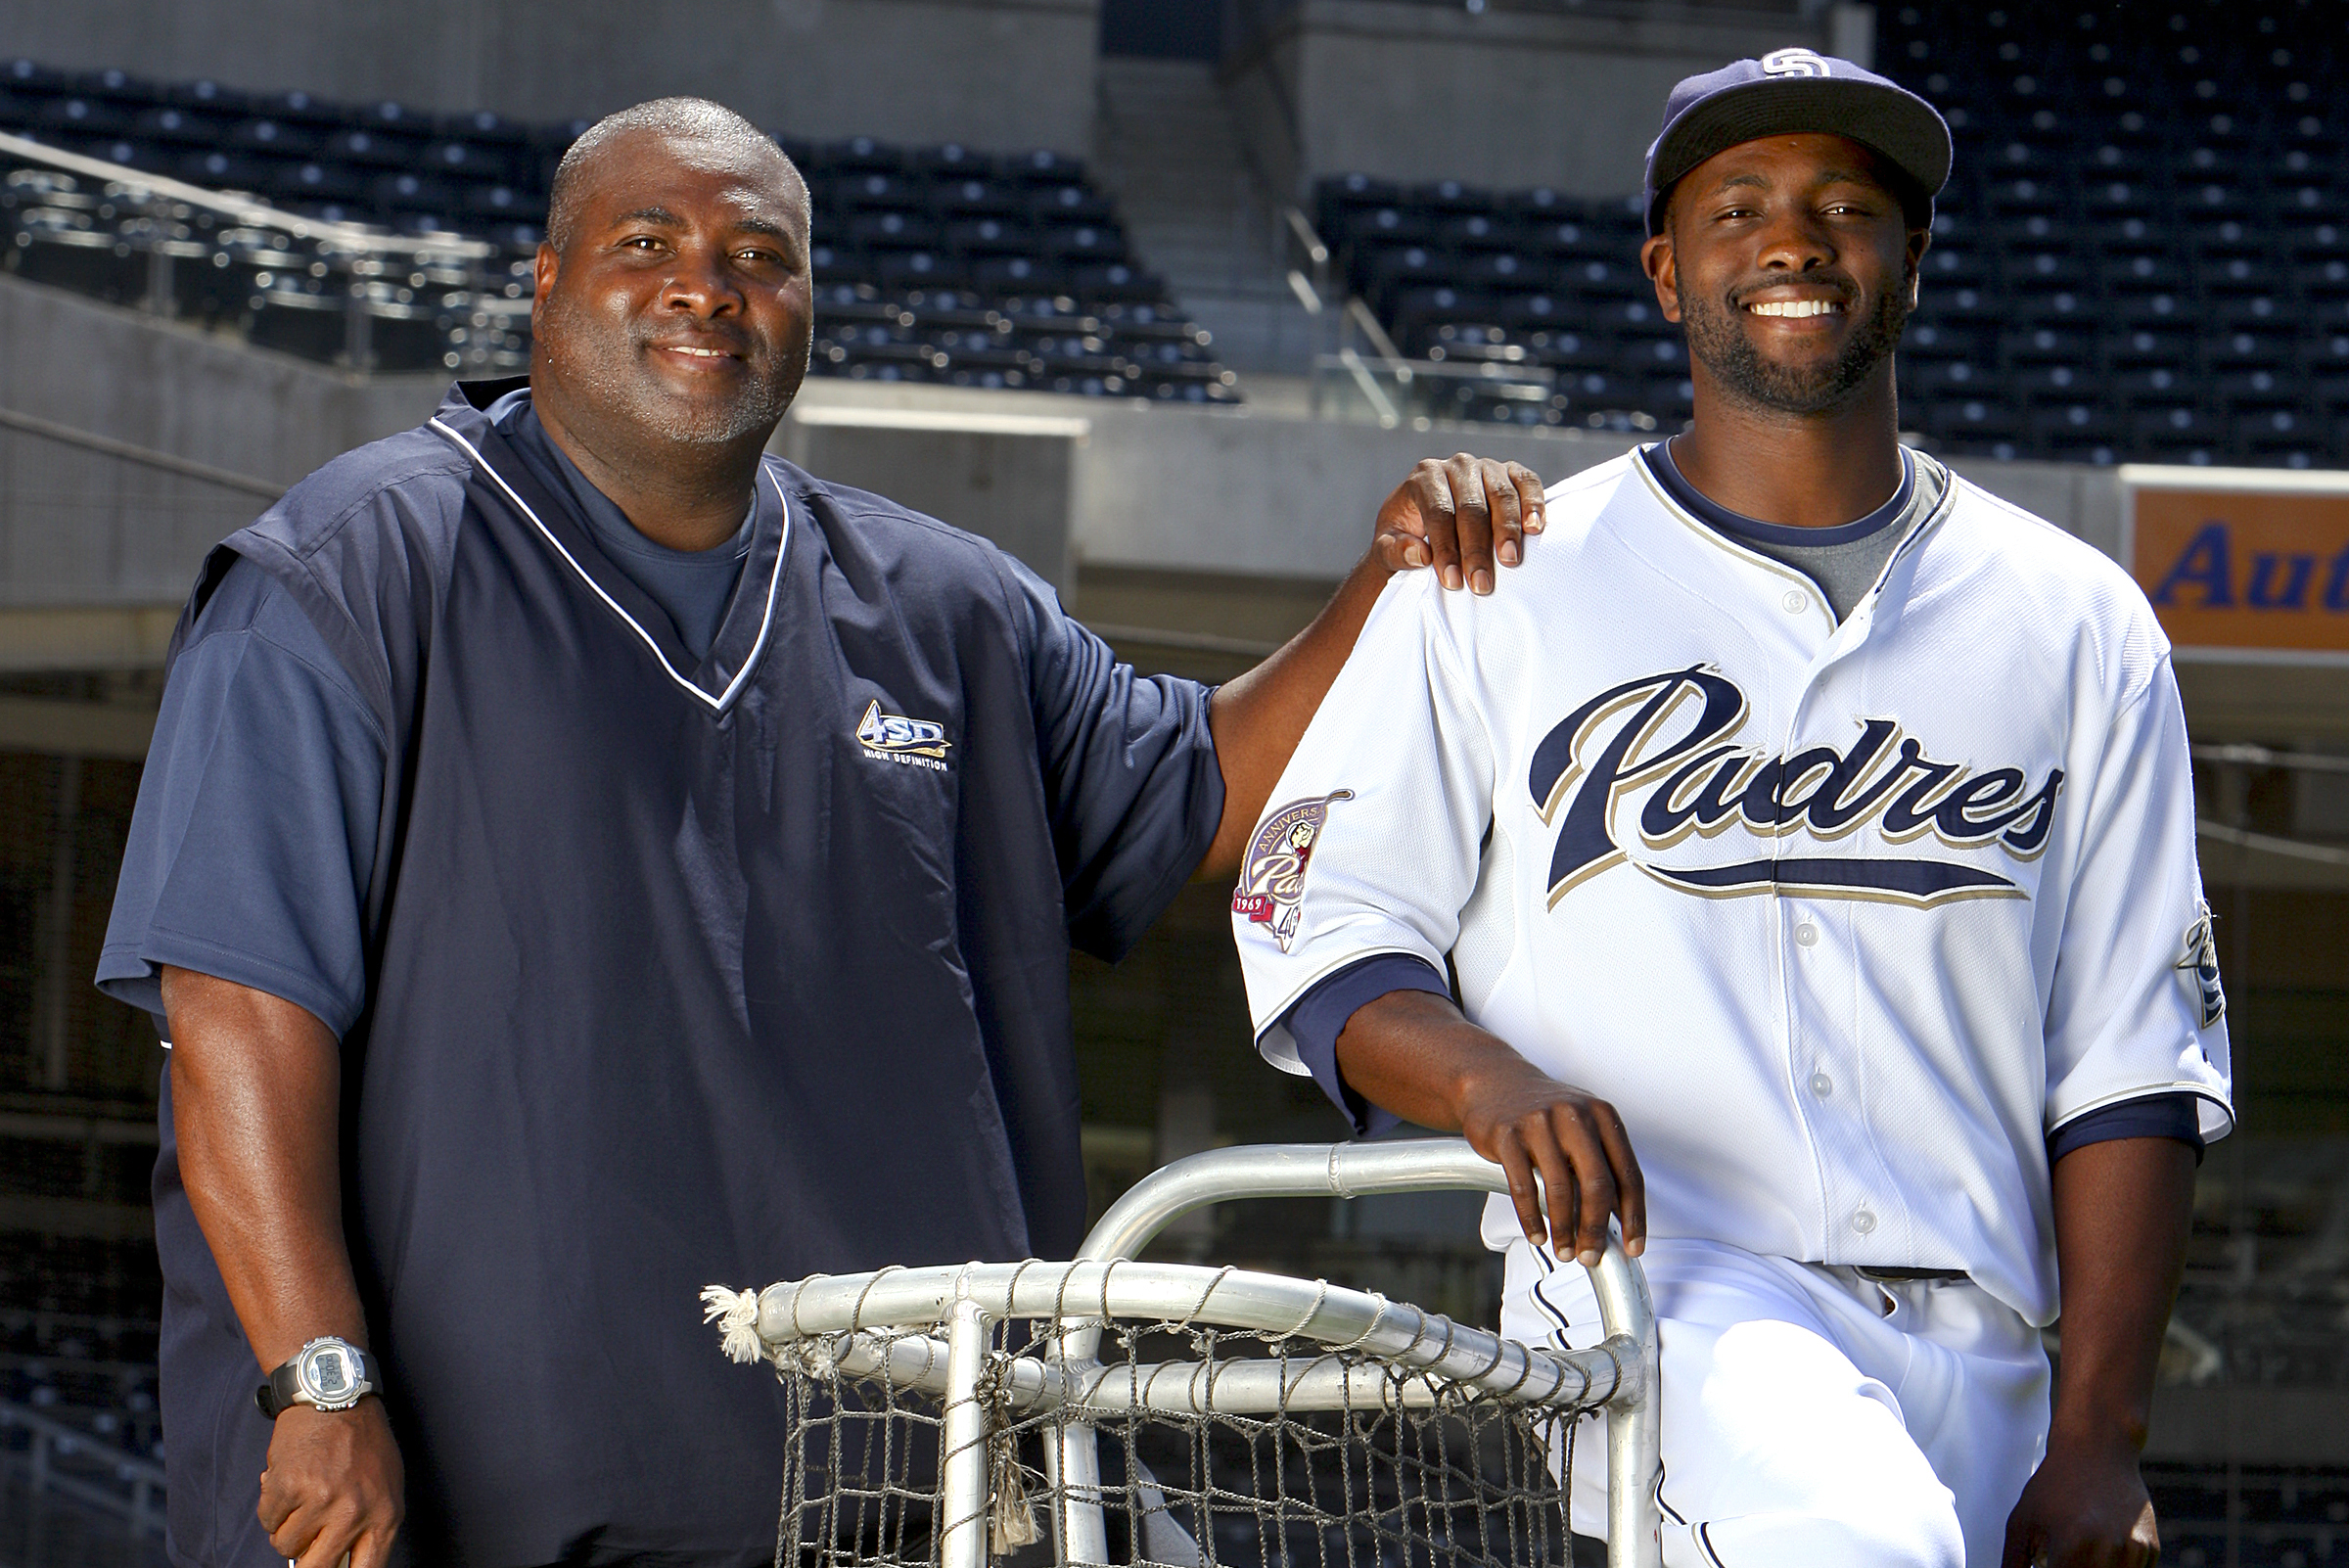 LaTroy Hawkins joins former MLB players in talking about race in